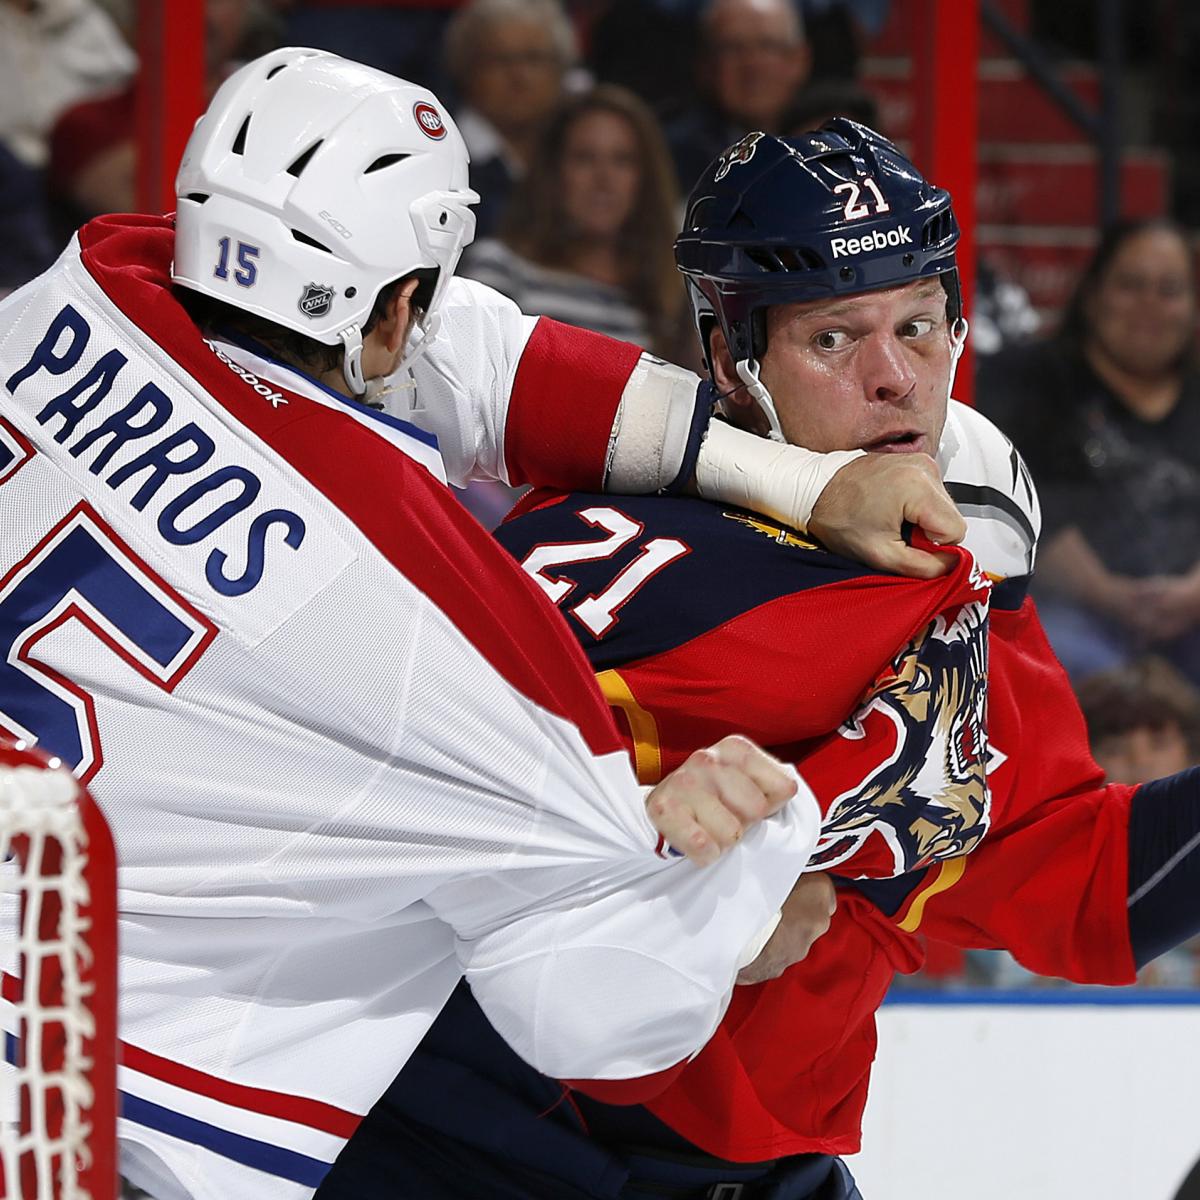 Can Shawn Thornton win his 15-game suspension appeal?